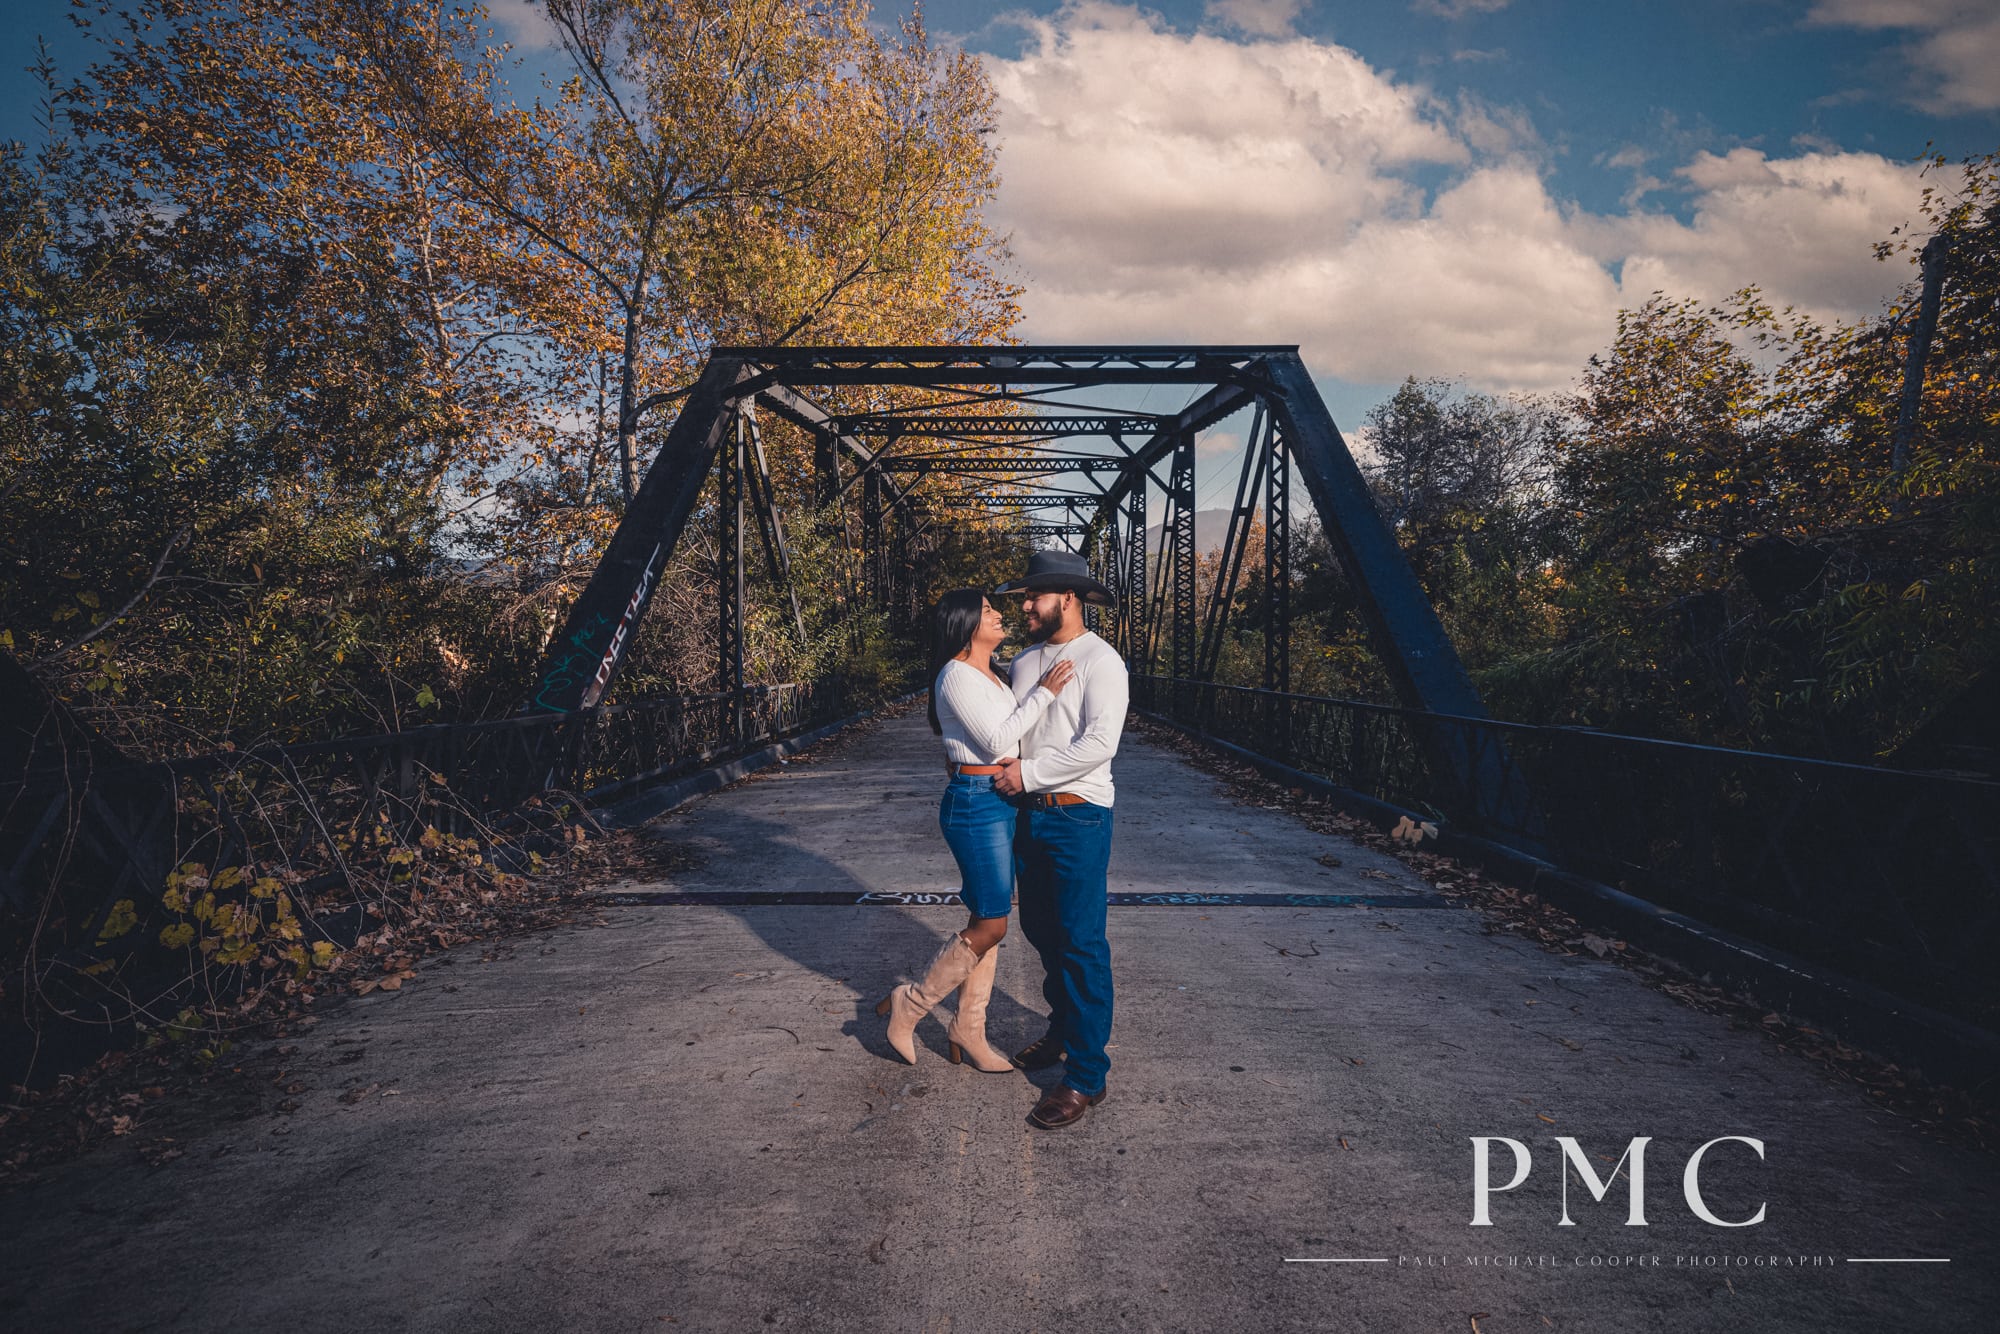 A cinematic portrait of a couple embracing on a bridge during their fall engagement session.